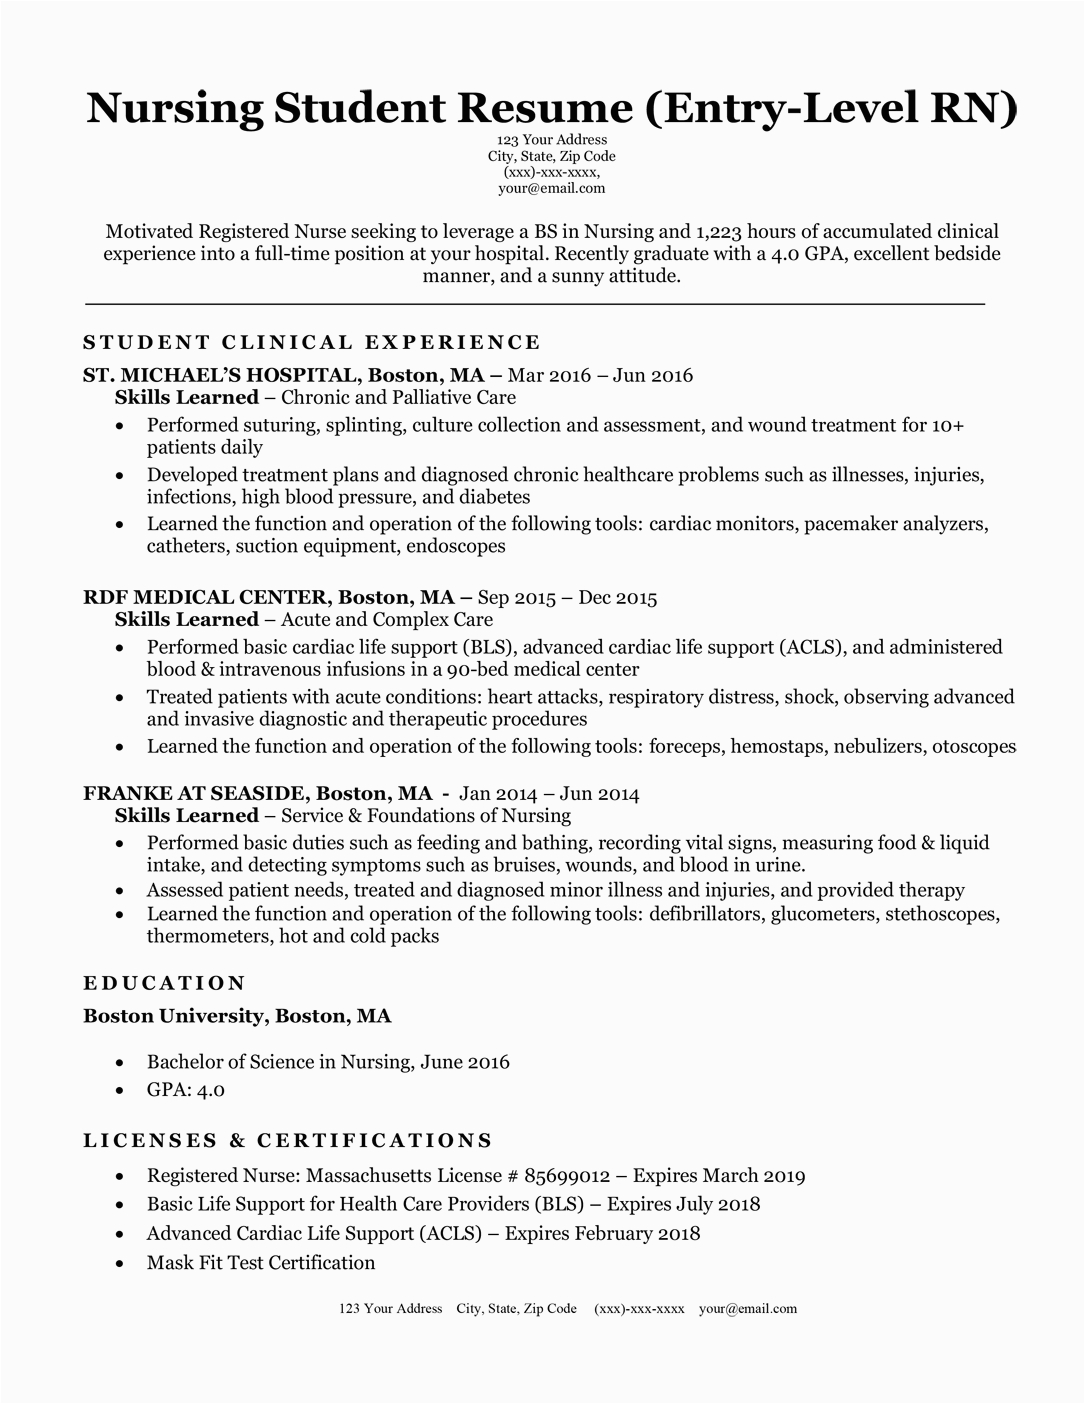 Sample Resume for Company Nurse without Experience Nursing Student Resume with No Experience Database Letter Templates